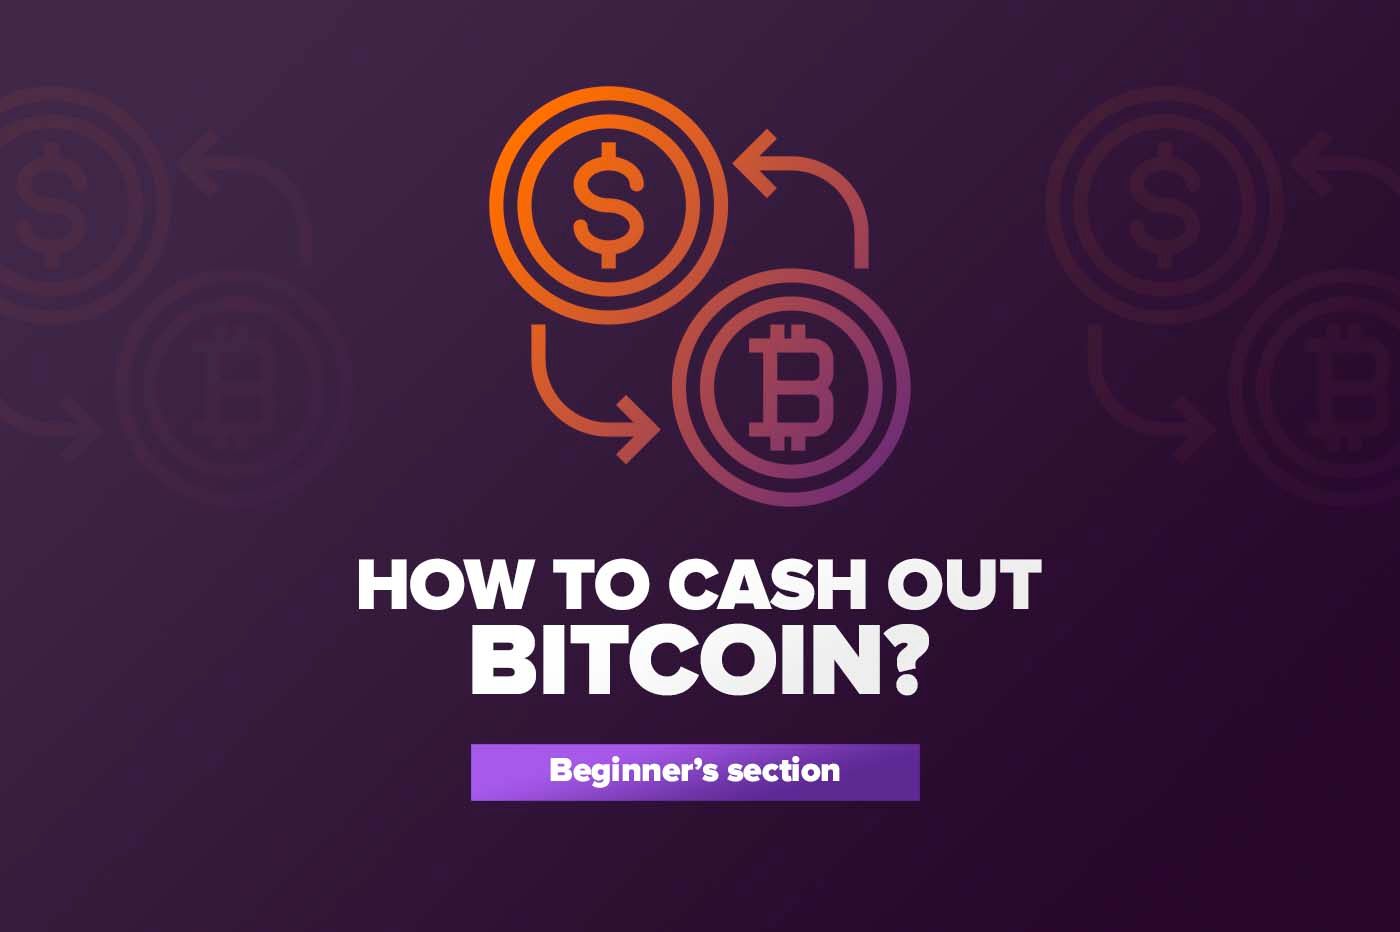 How to cash out BTC at Kraken, Coinbase and Poloniex?